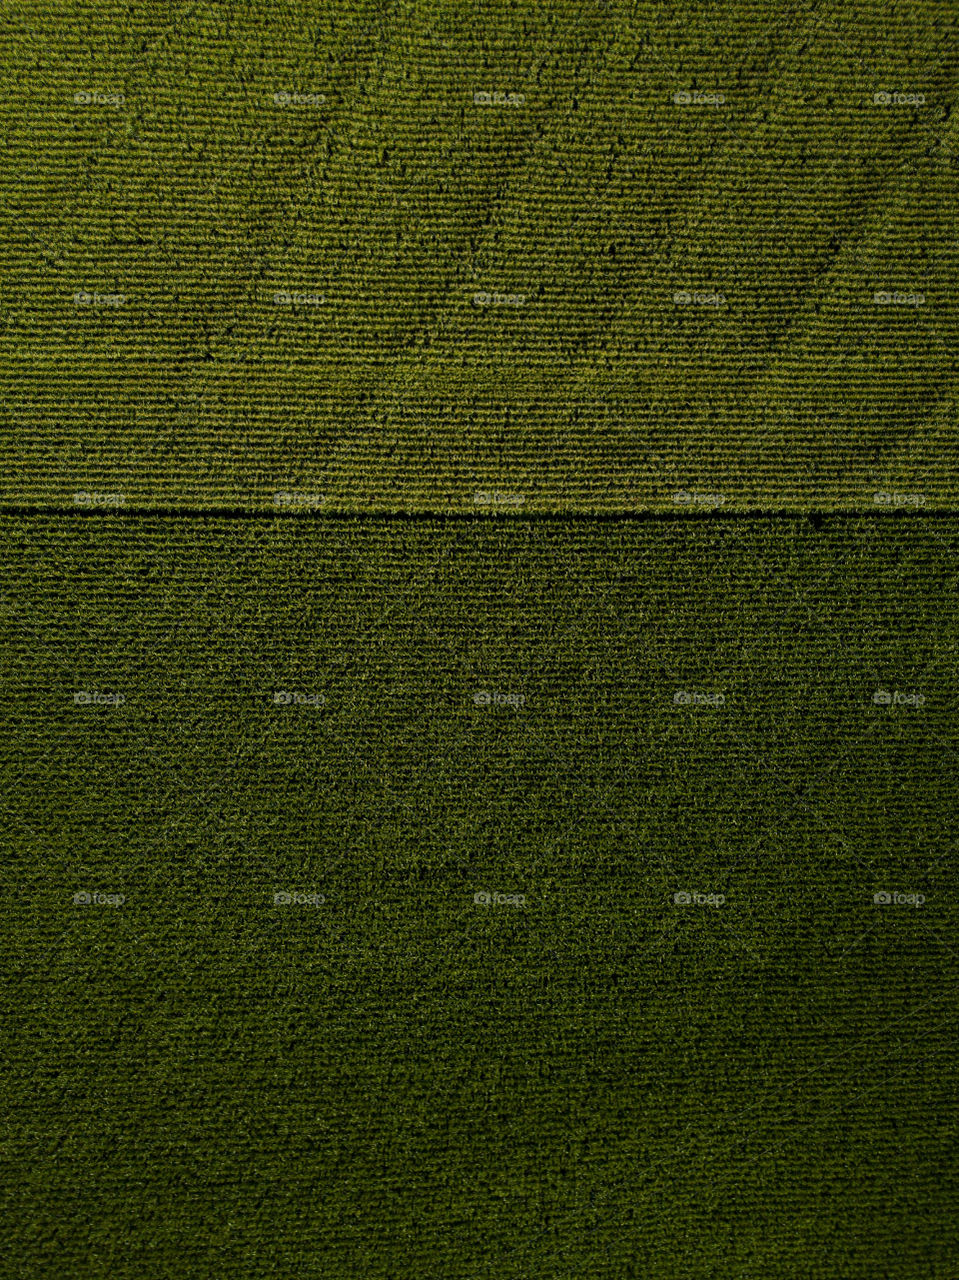 two different corn fields from above